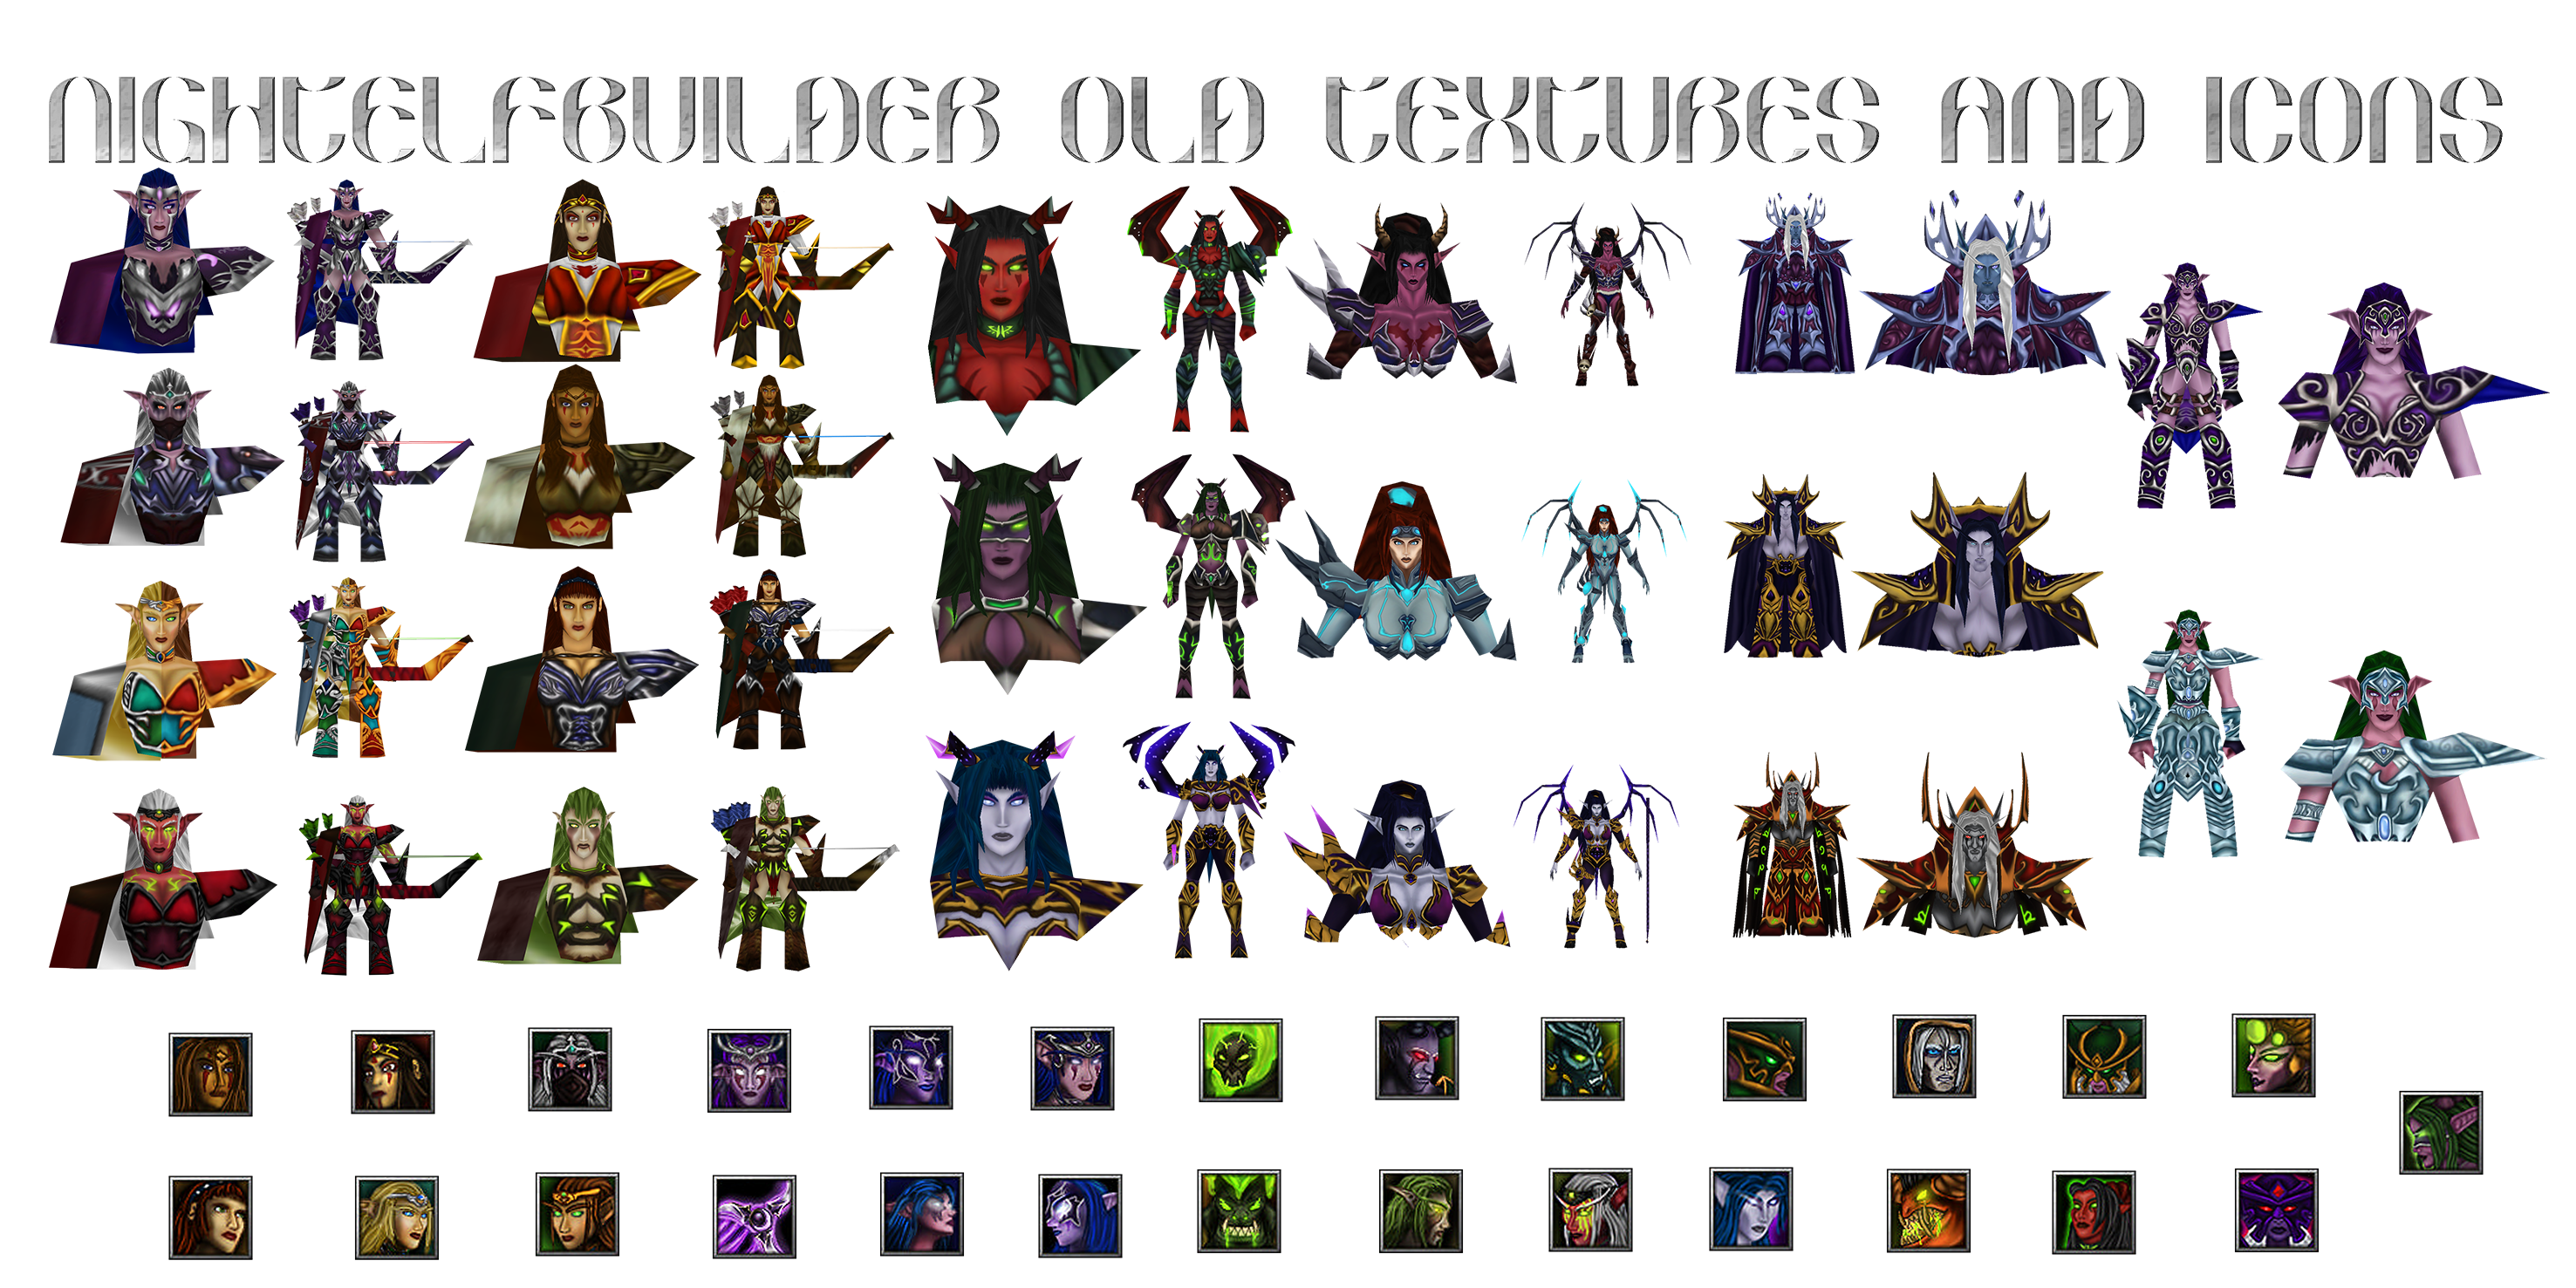 nightelfbuilder's deleted textures and icons